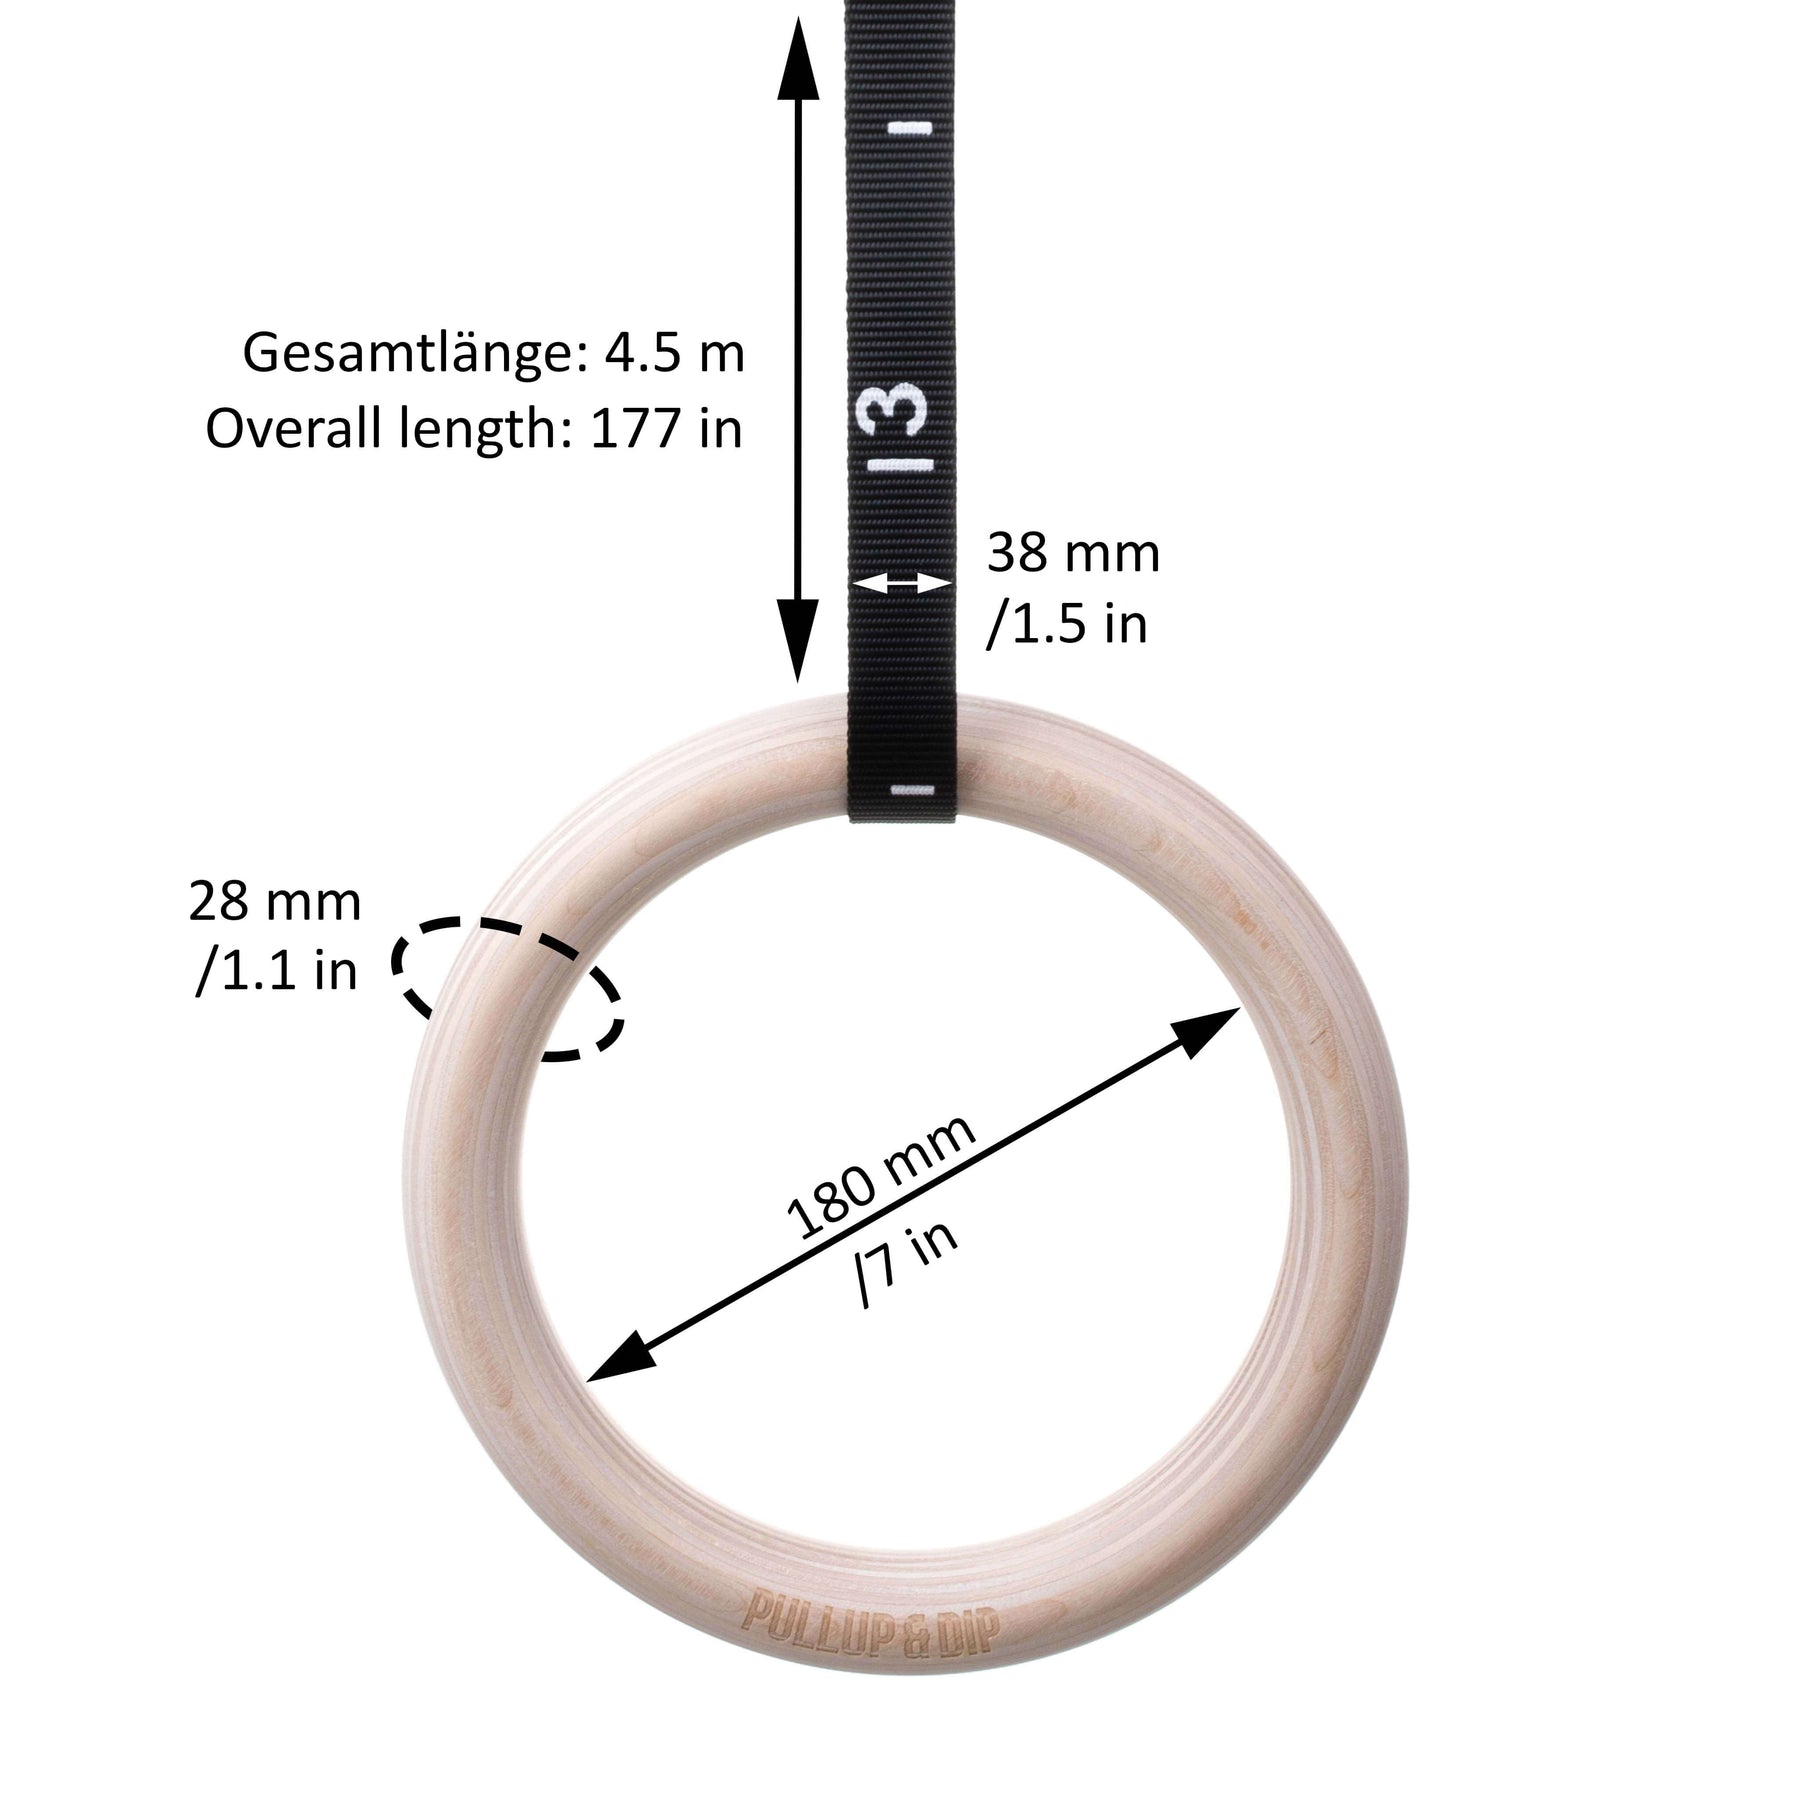 Wooden Gymnastic Rings - Includes Numbered Buckle Straps, Door Anchor and Sports Bag